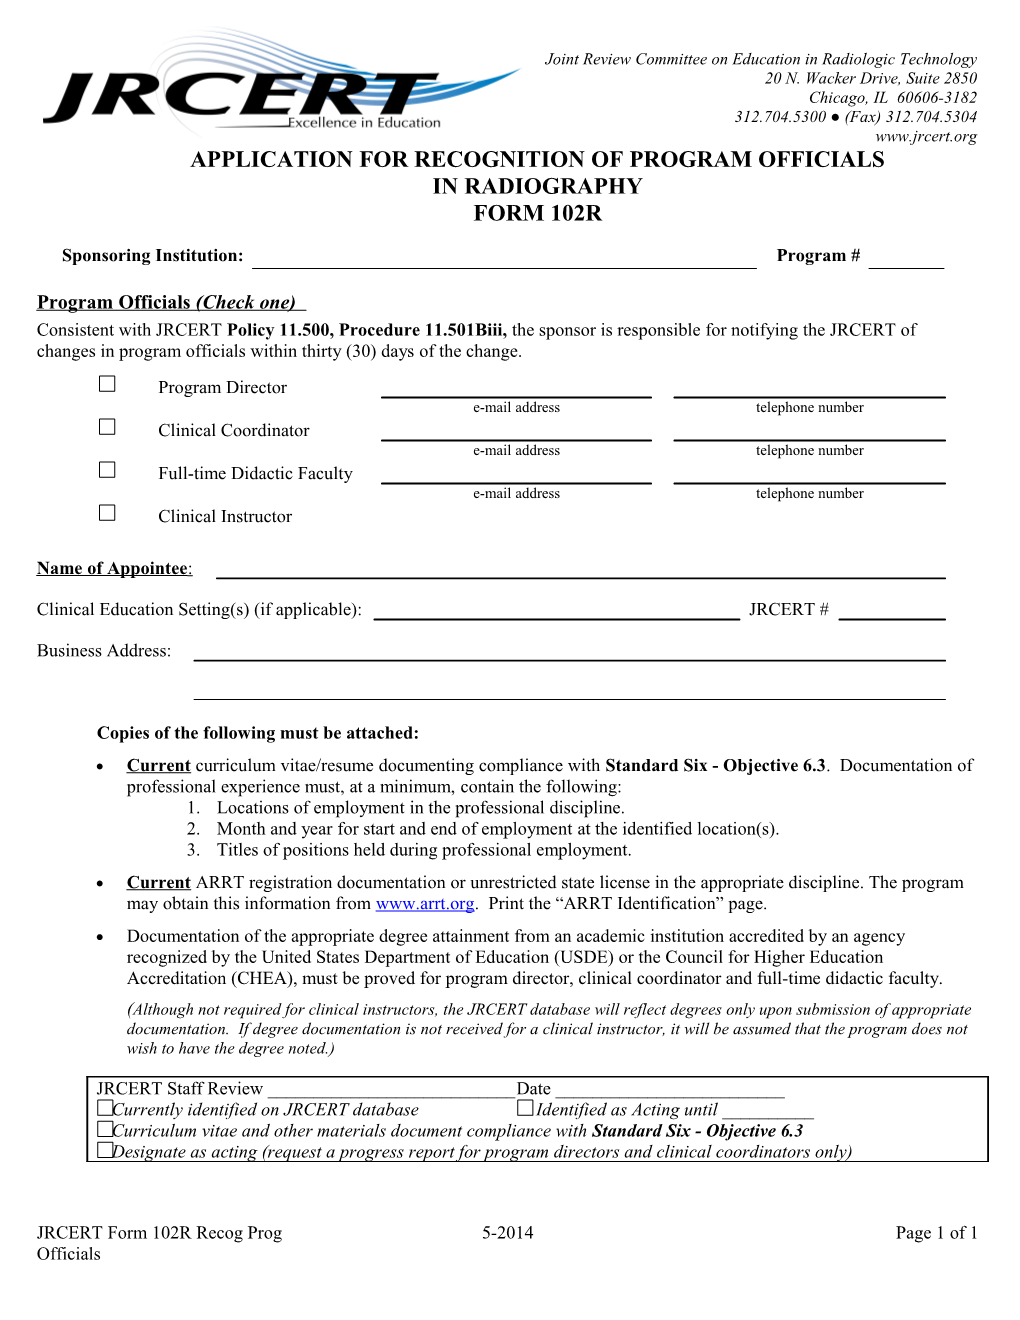 Application for Recognition of Program Officials